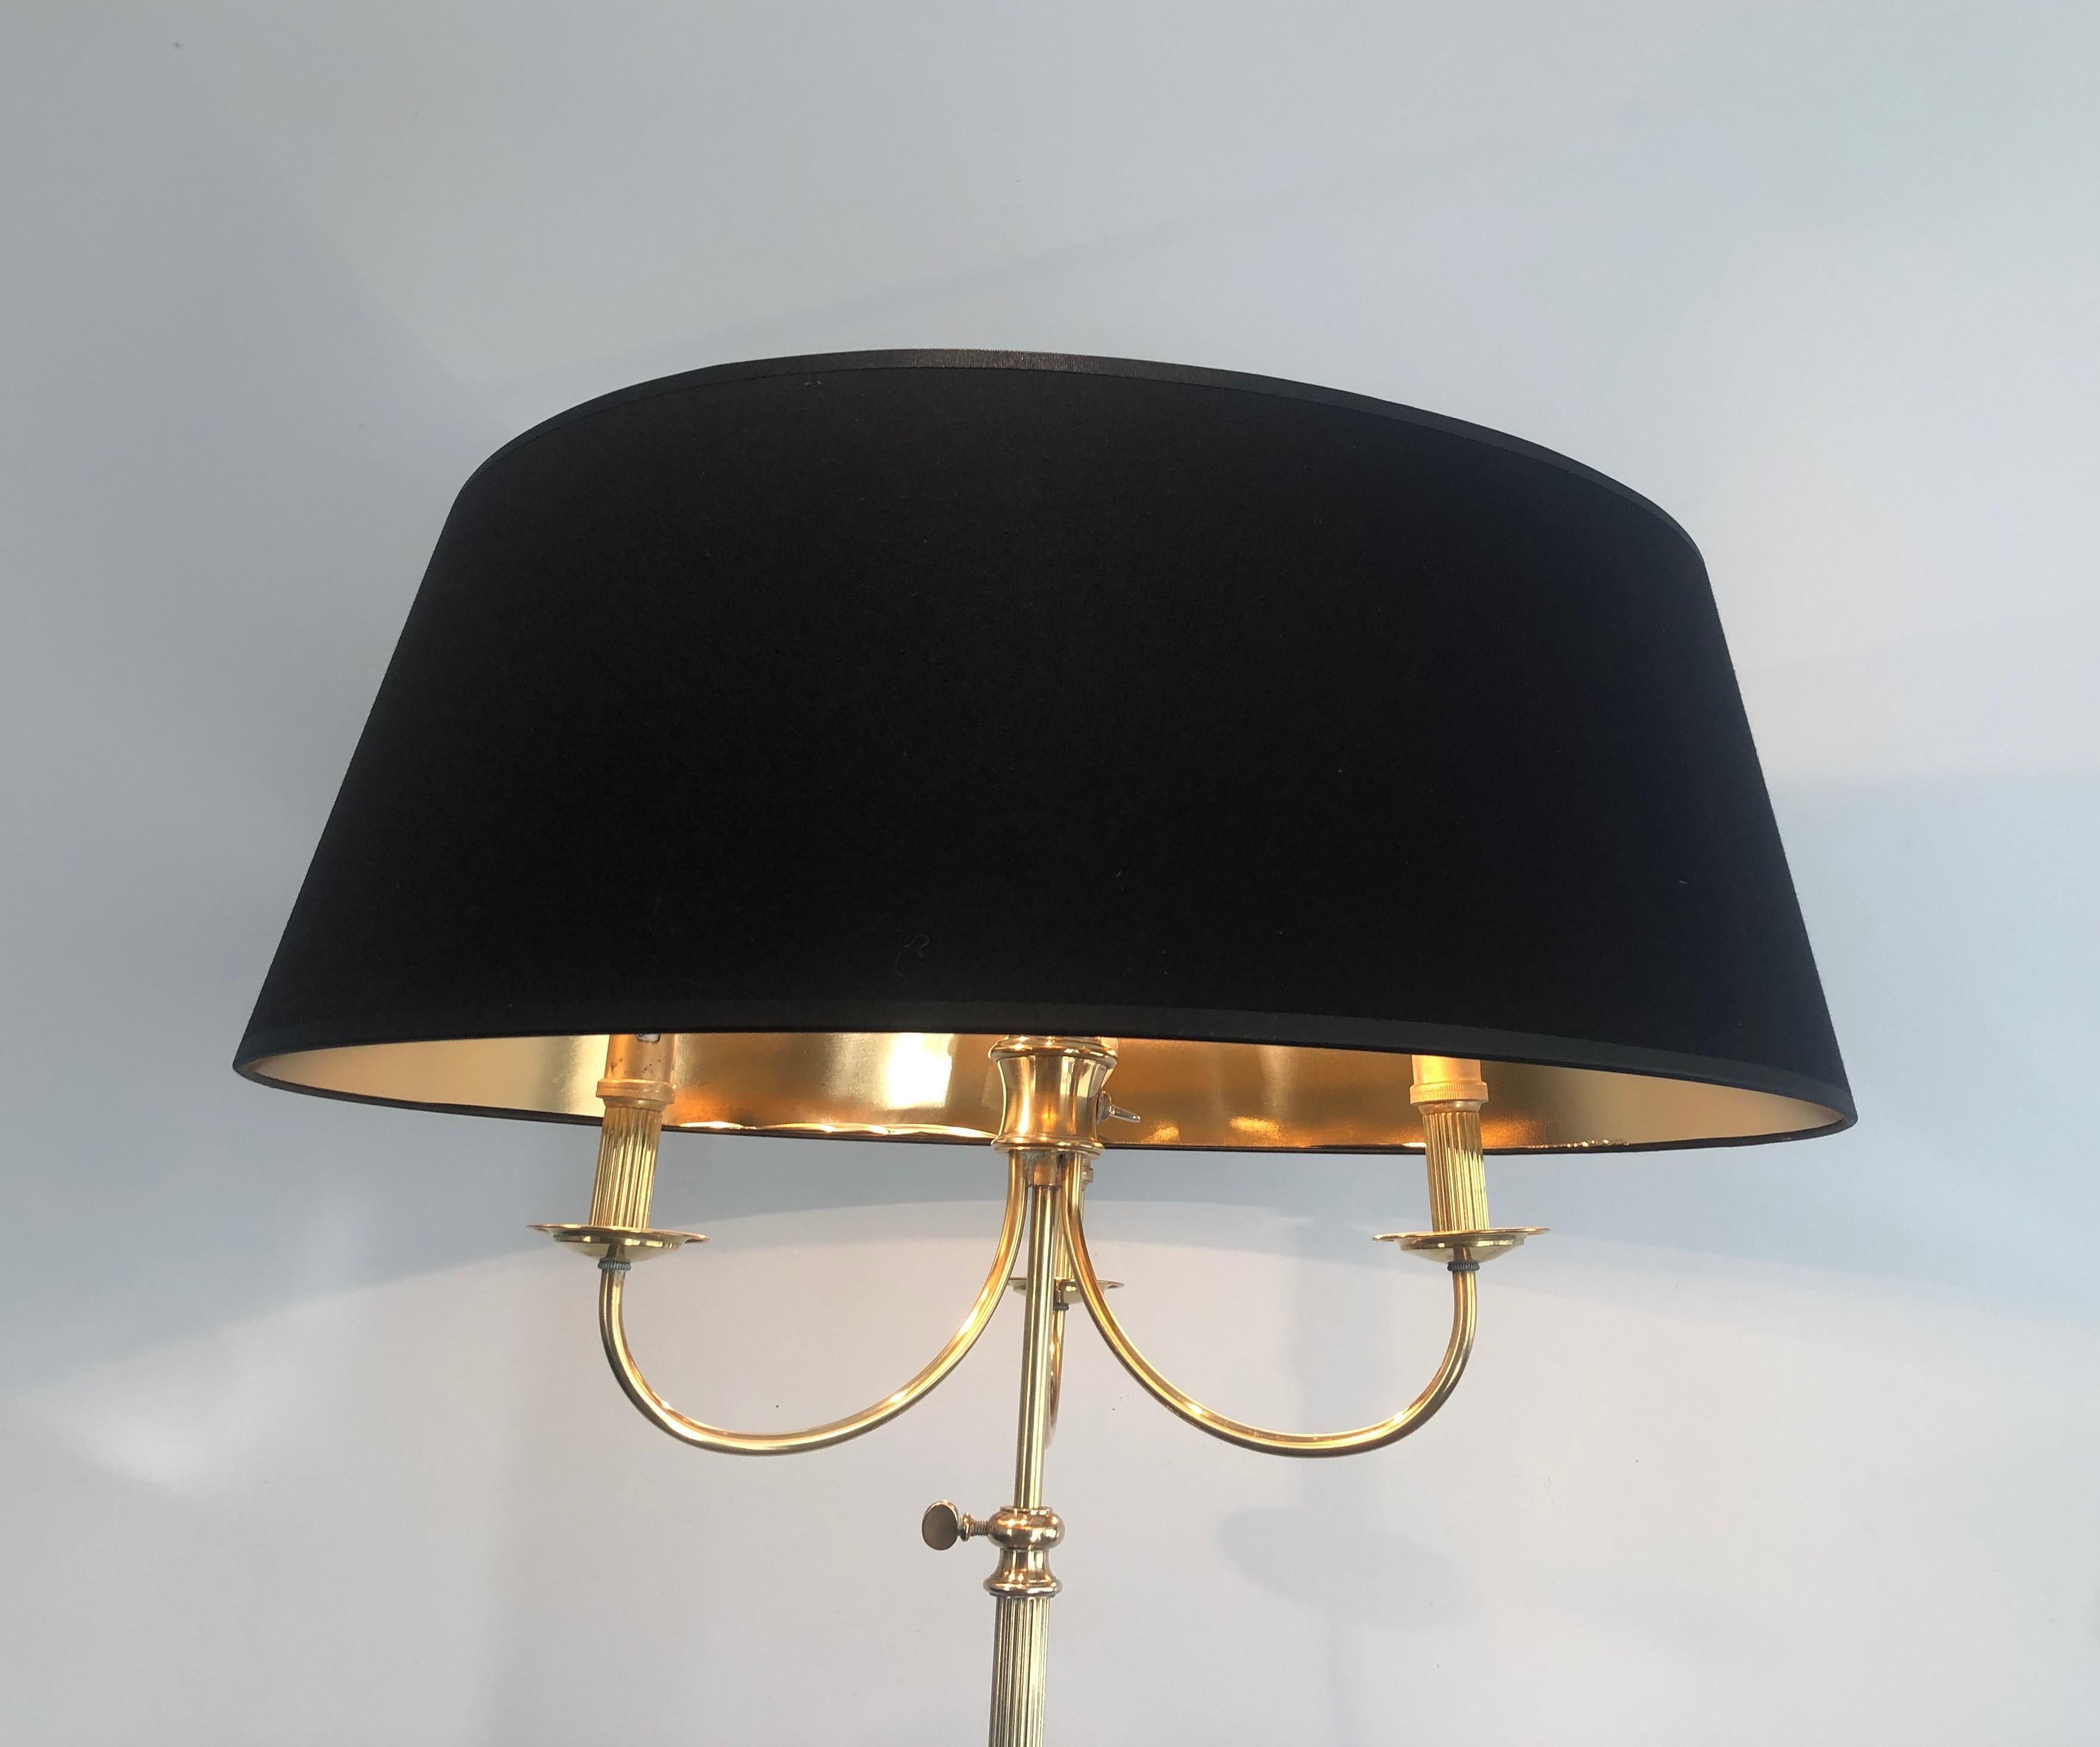 Mid-20th Century Tripode Brass Floor Lamp with 3 Arms, French Work by Maison Jansen For Sale